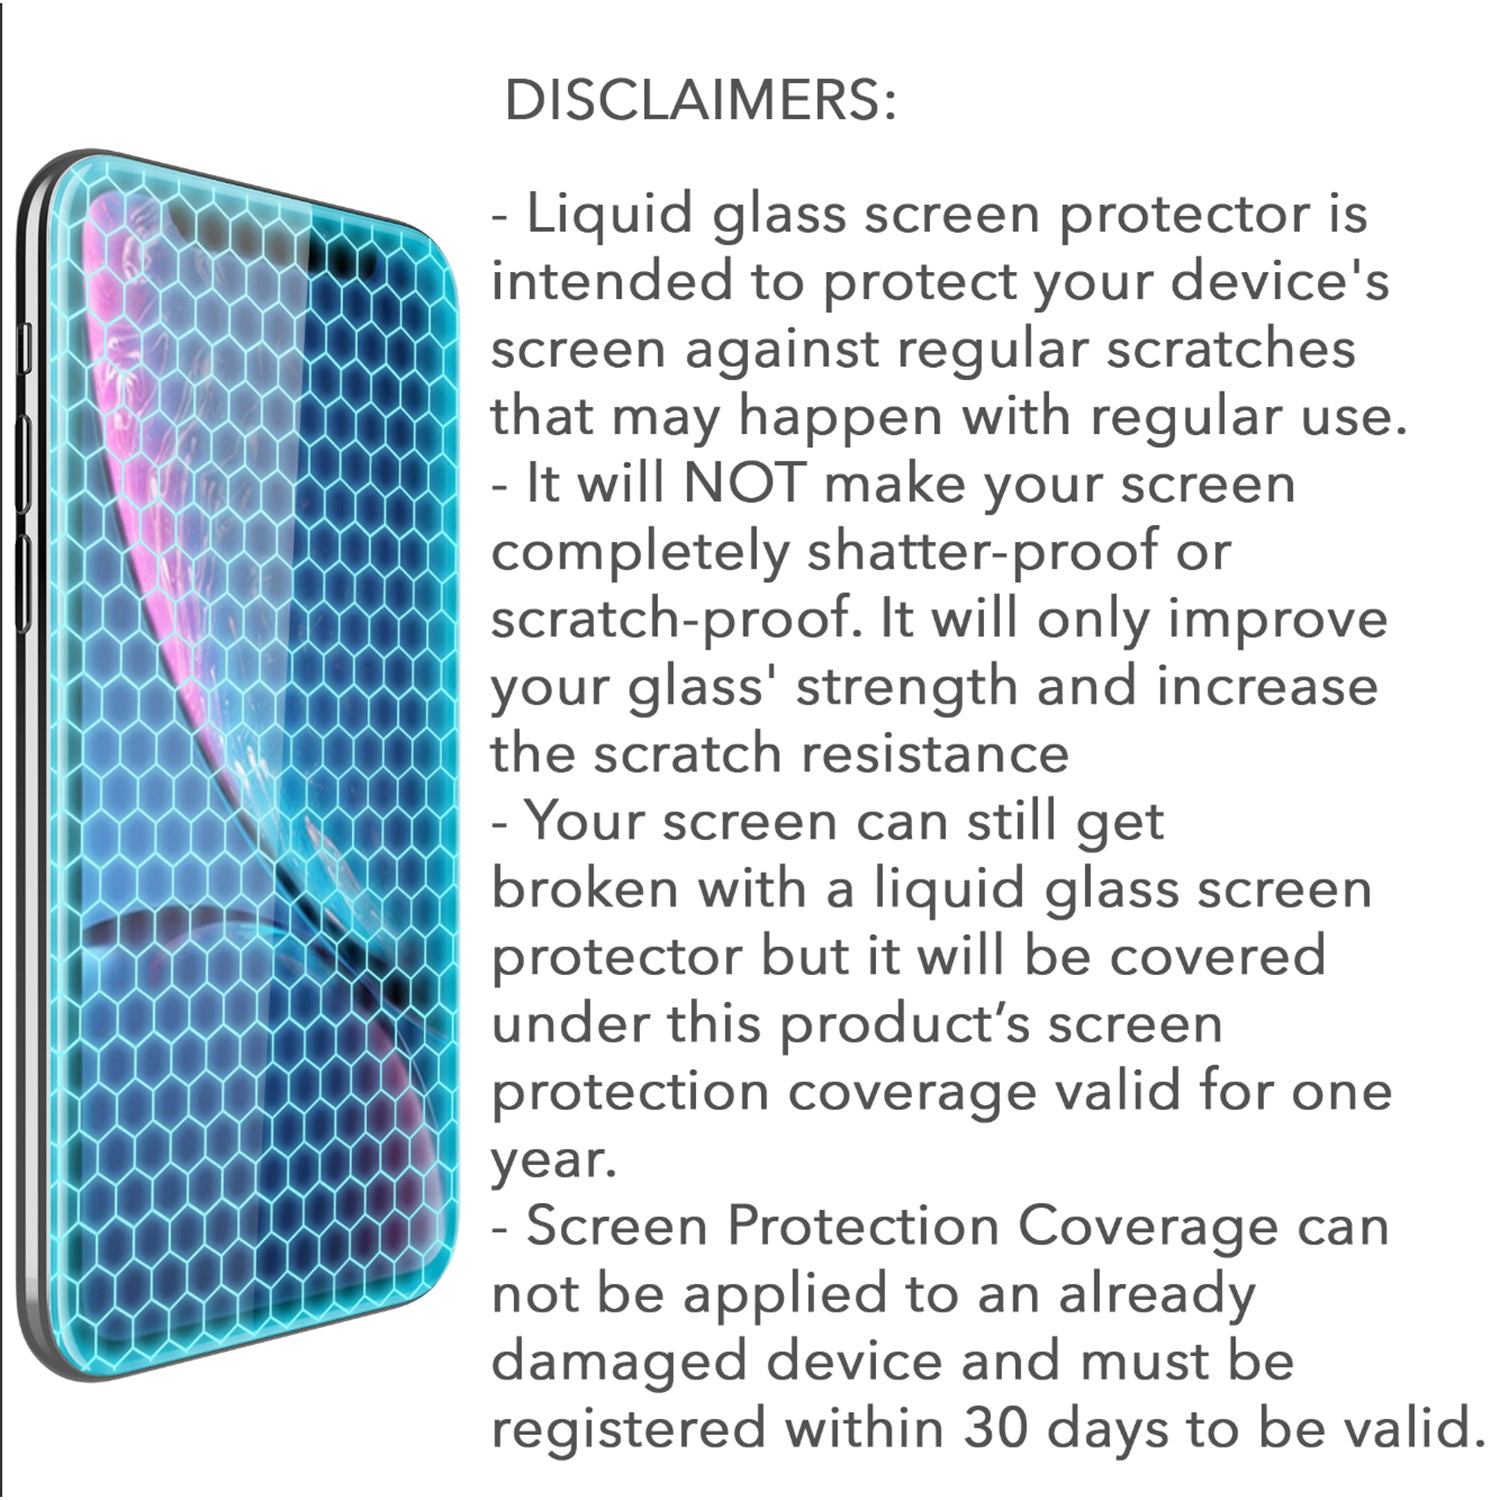 3 Pack Liquid Glass Screen Protector with $250 Screen Protection Guarantee